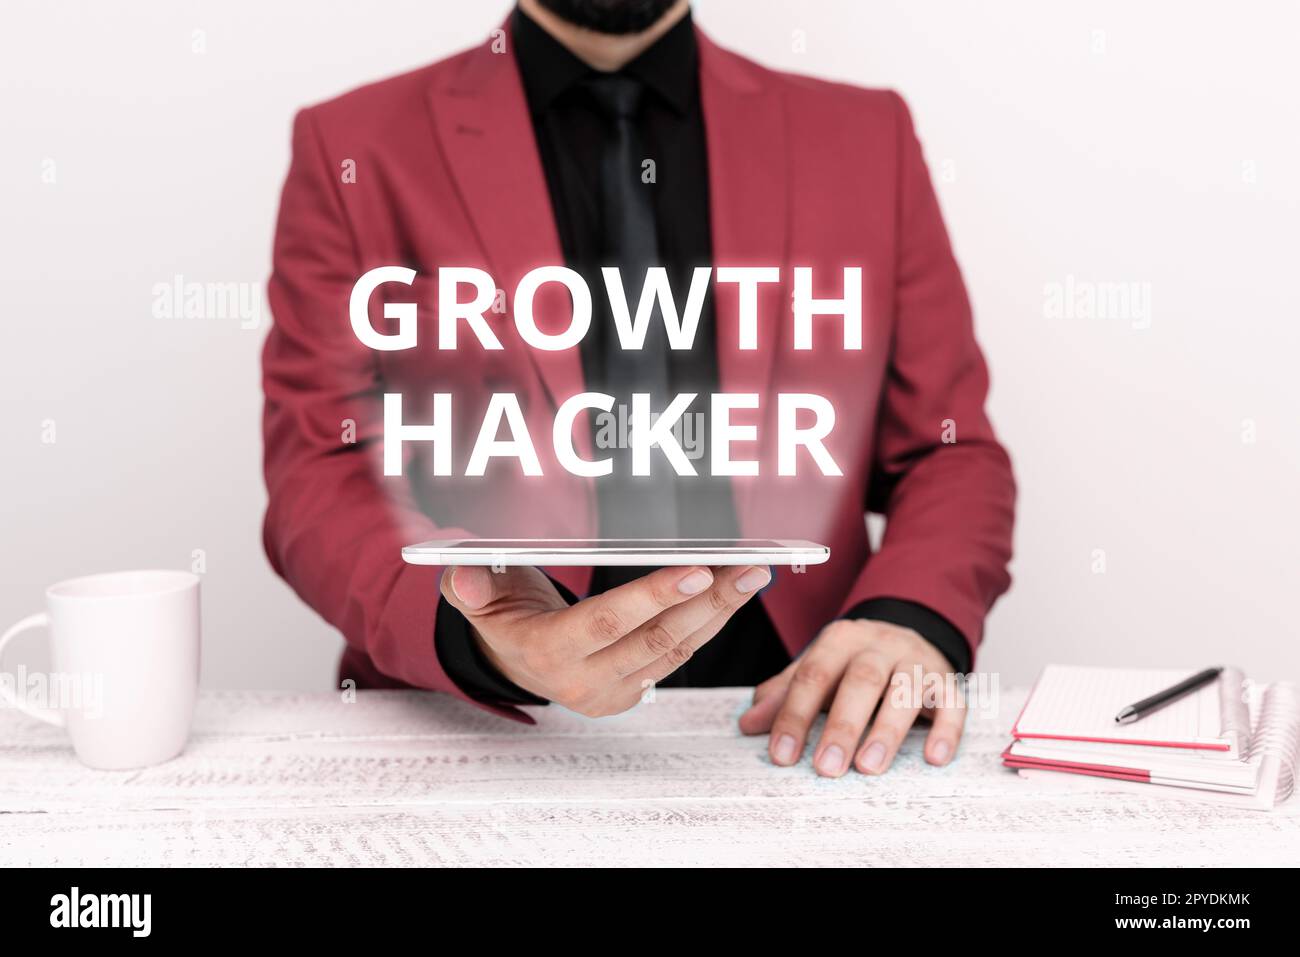 Sign displaying Growth Hacker. Business overview generally to acquire as many users or customers as possible Stock Photo